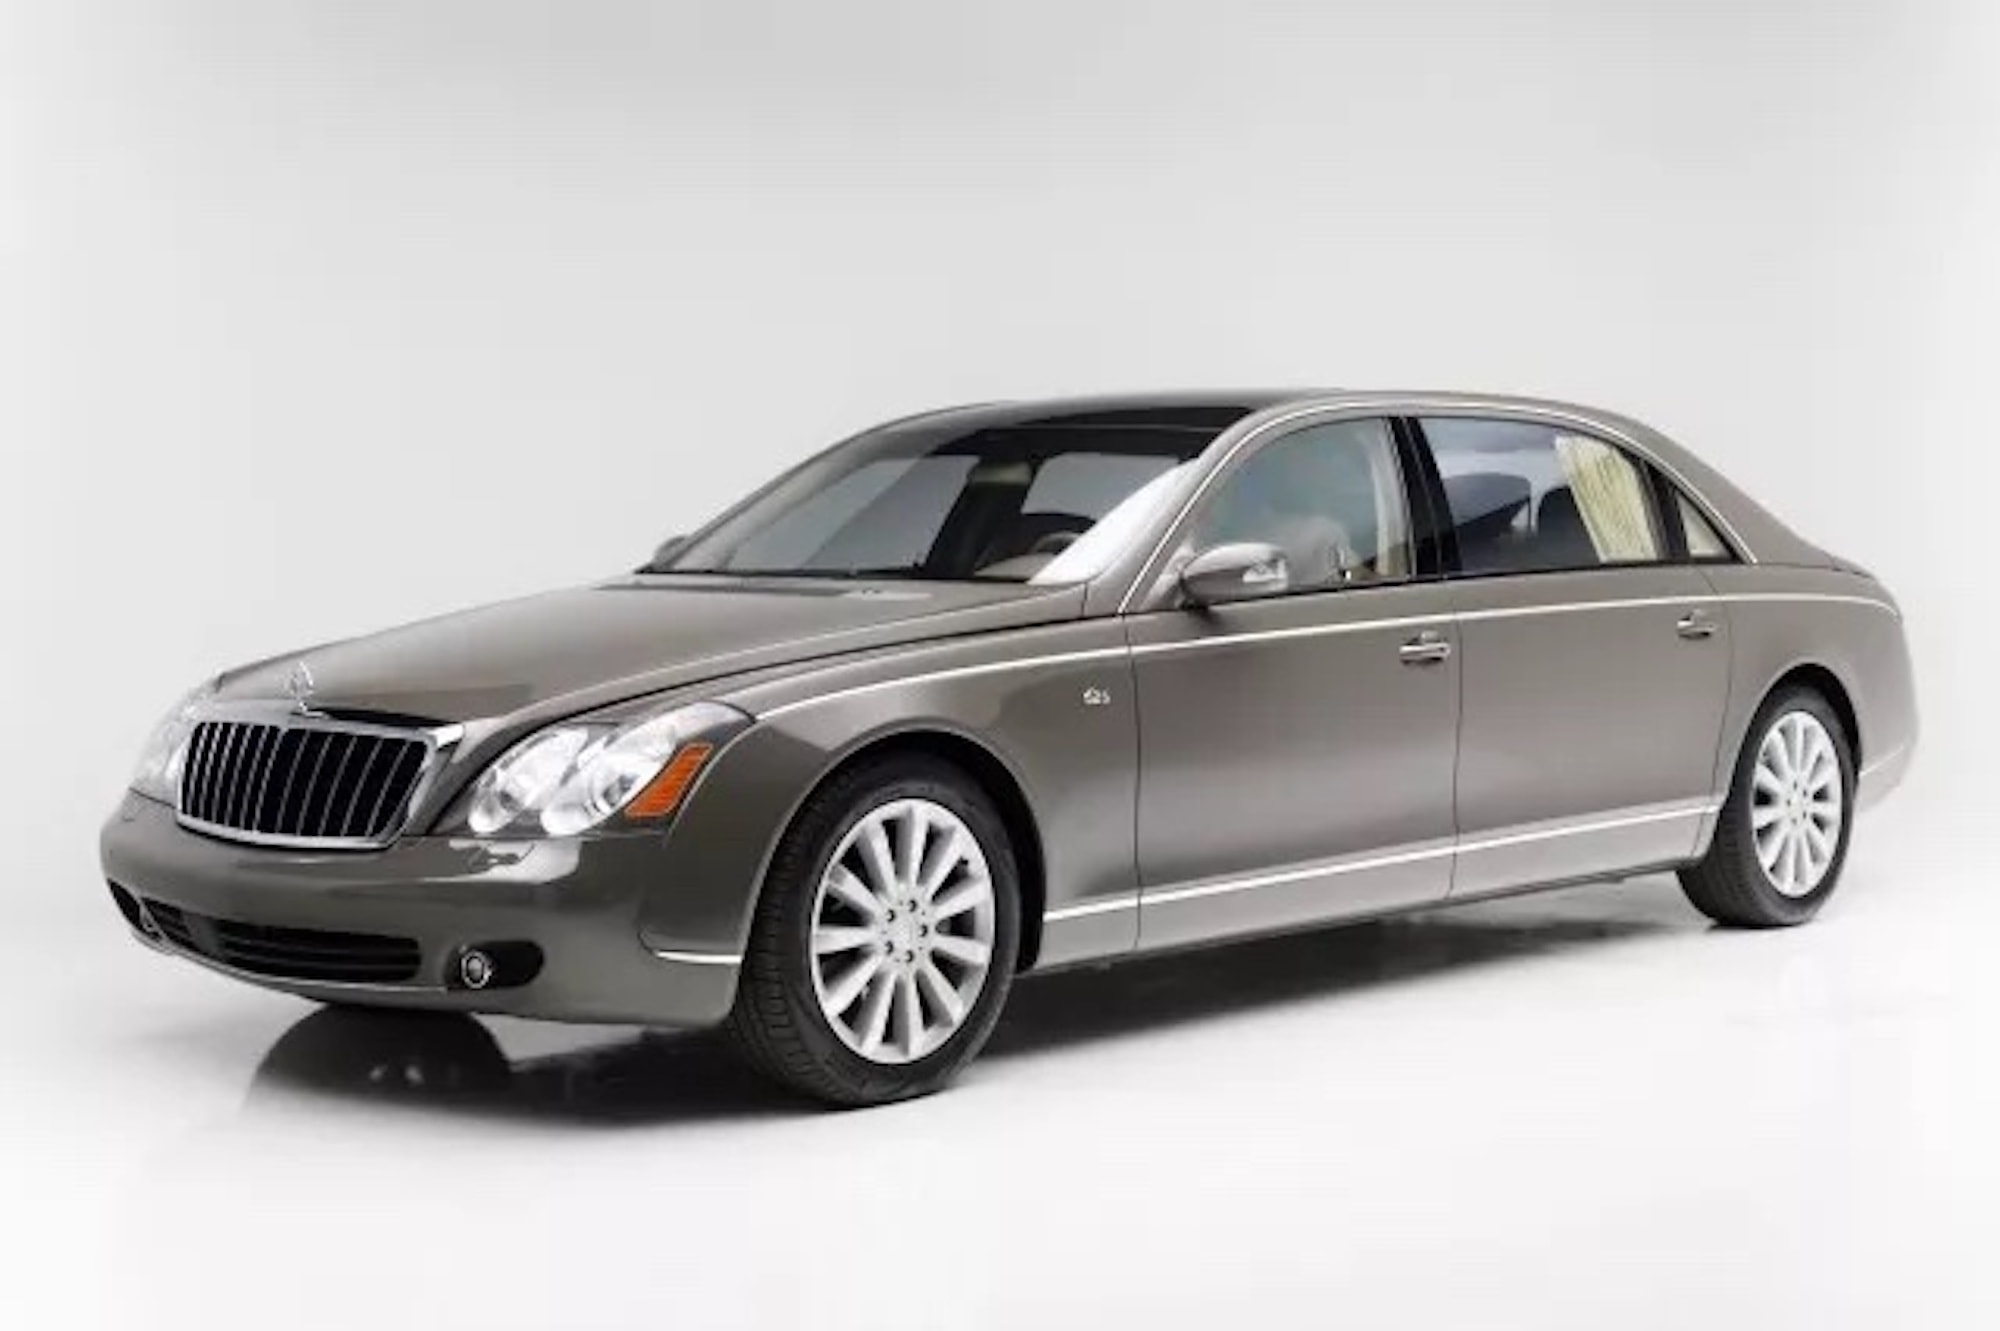 From Maybach 62 S to Mercedes-Maybach S-Class